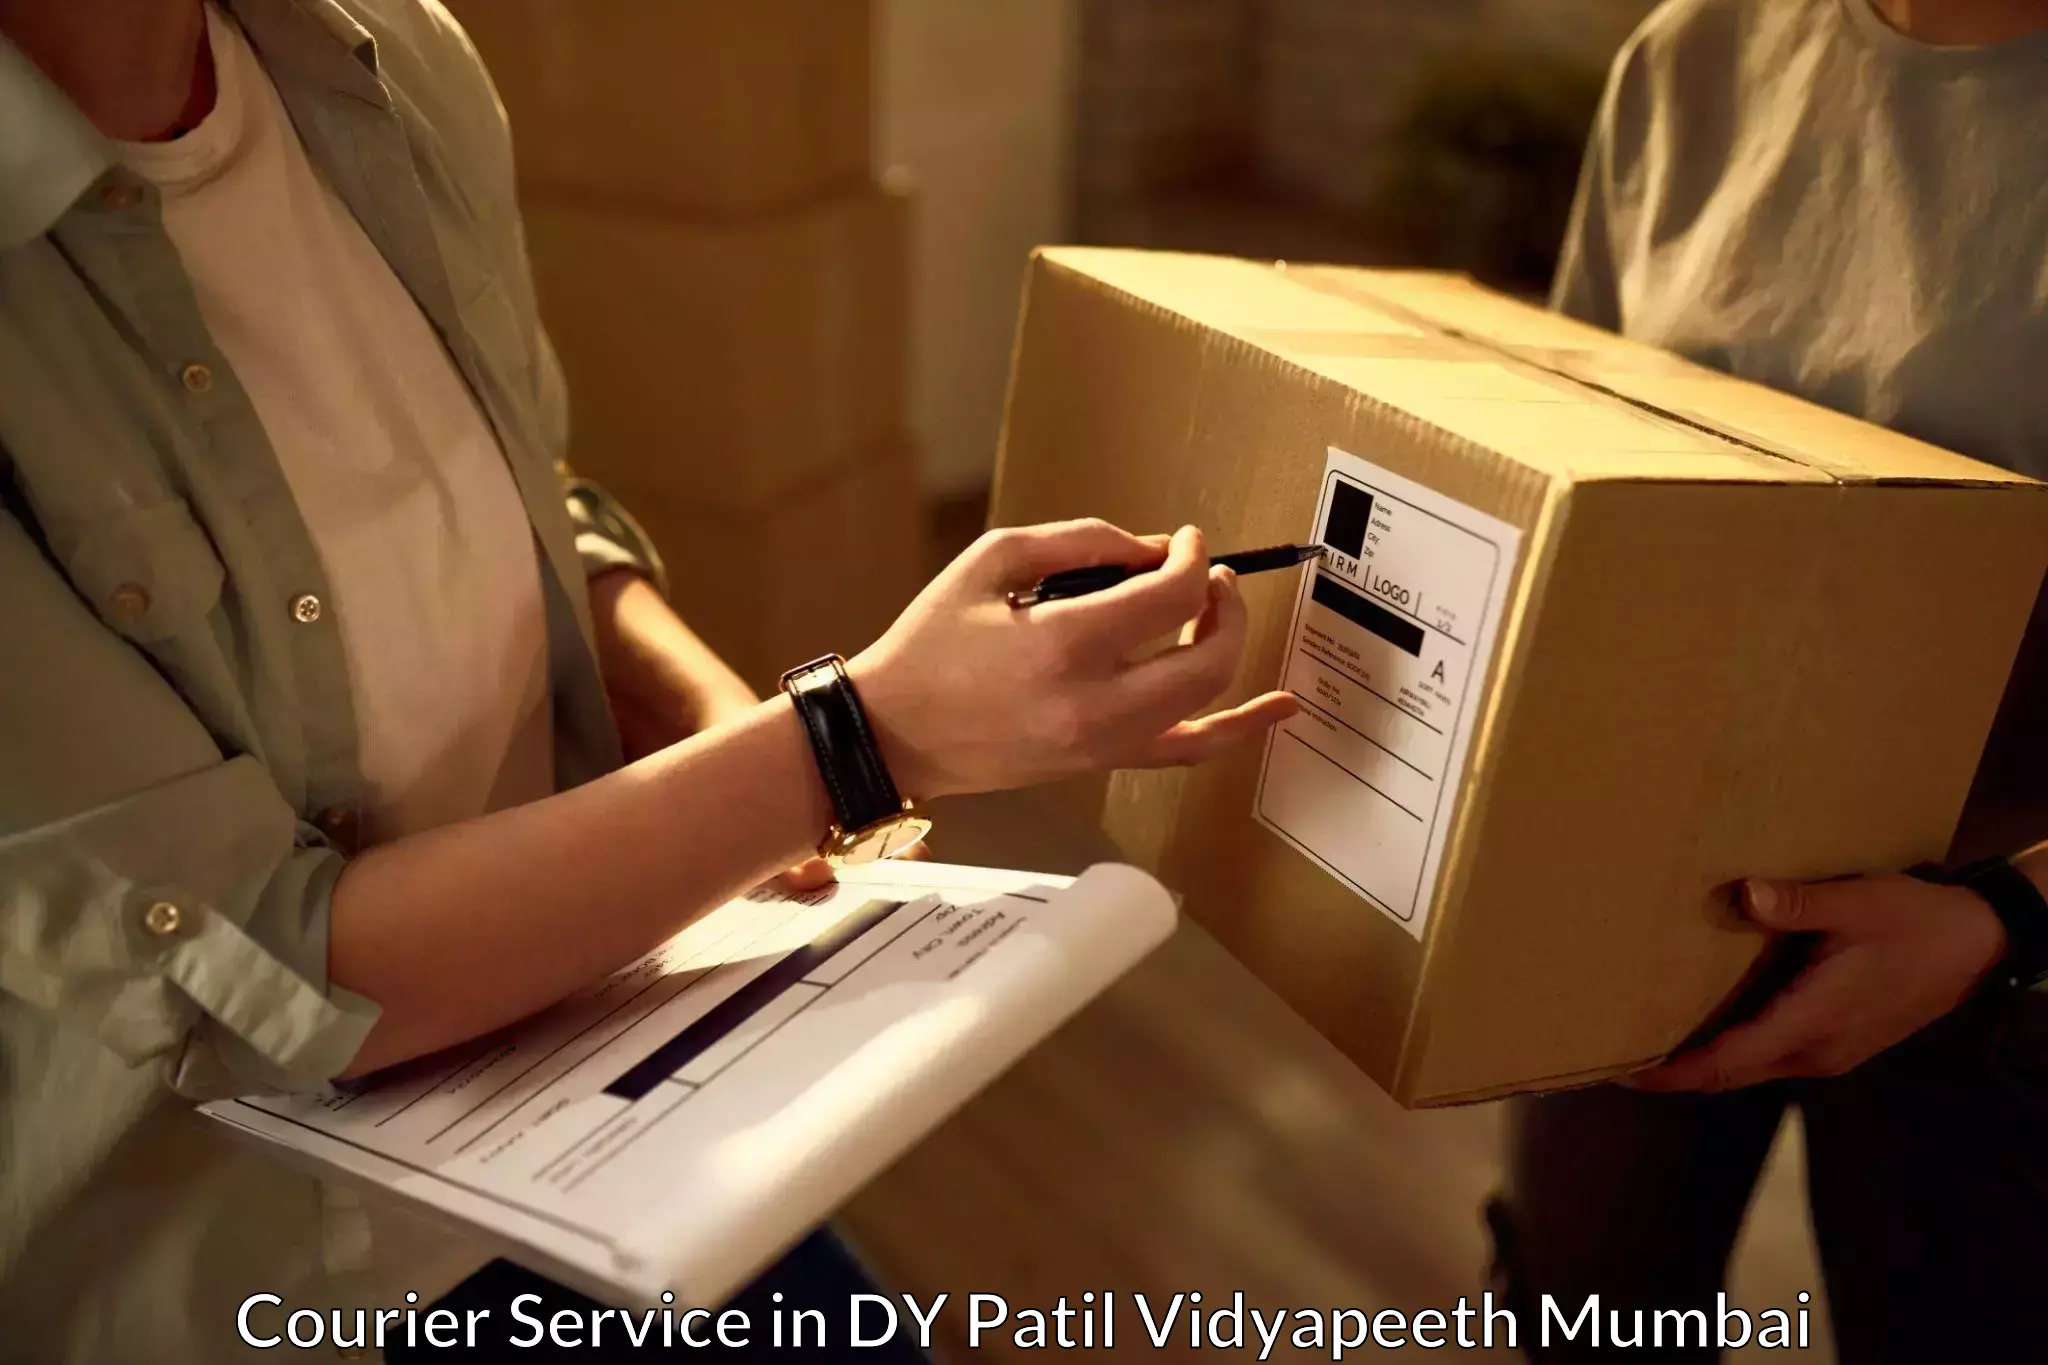 Efficient parcel delivery in DY Patil Vidyapeeth Mumbai